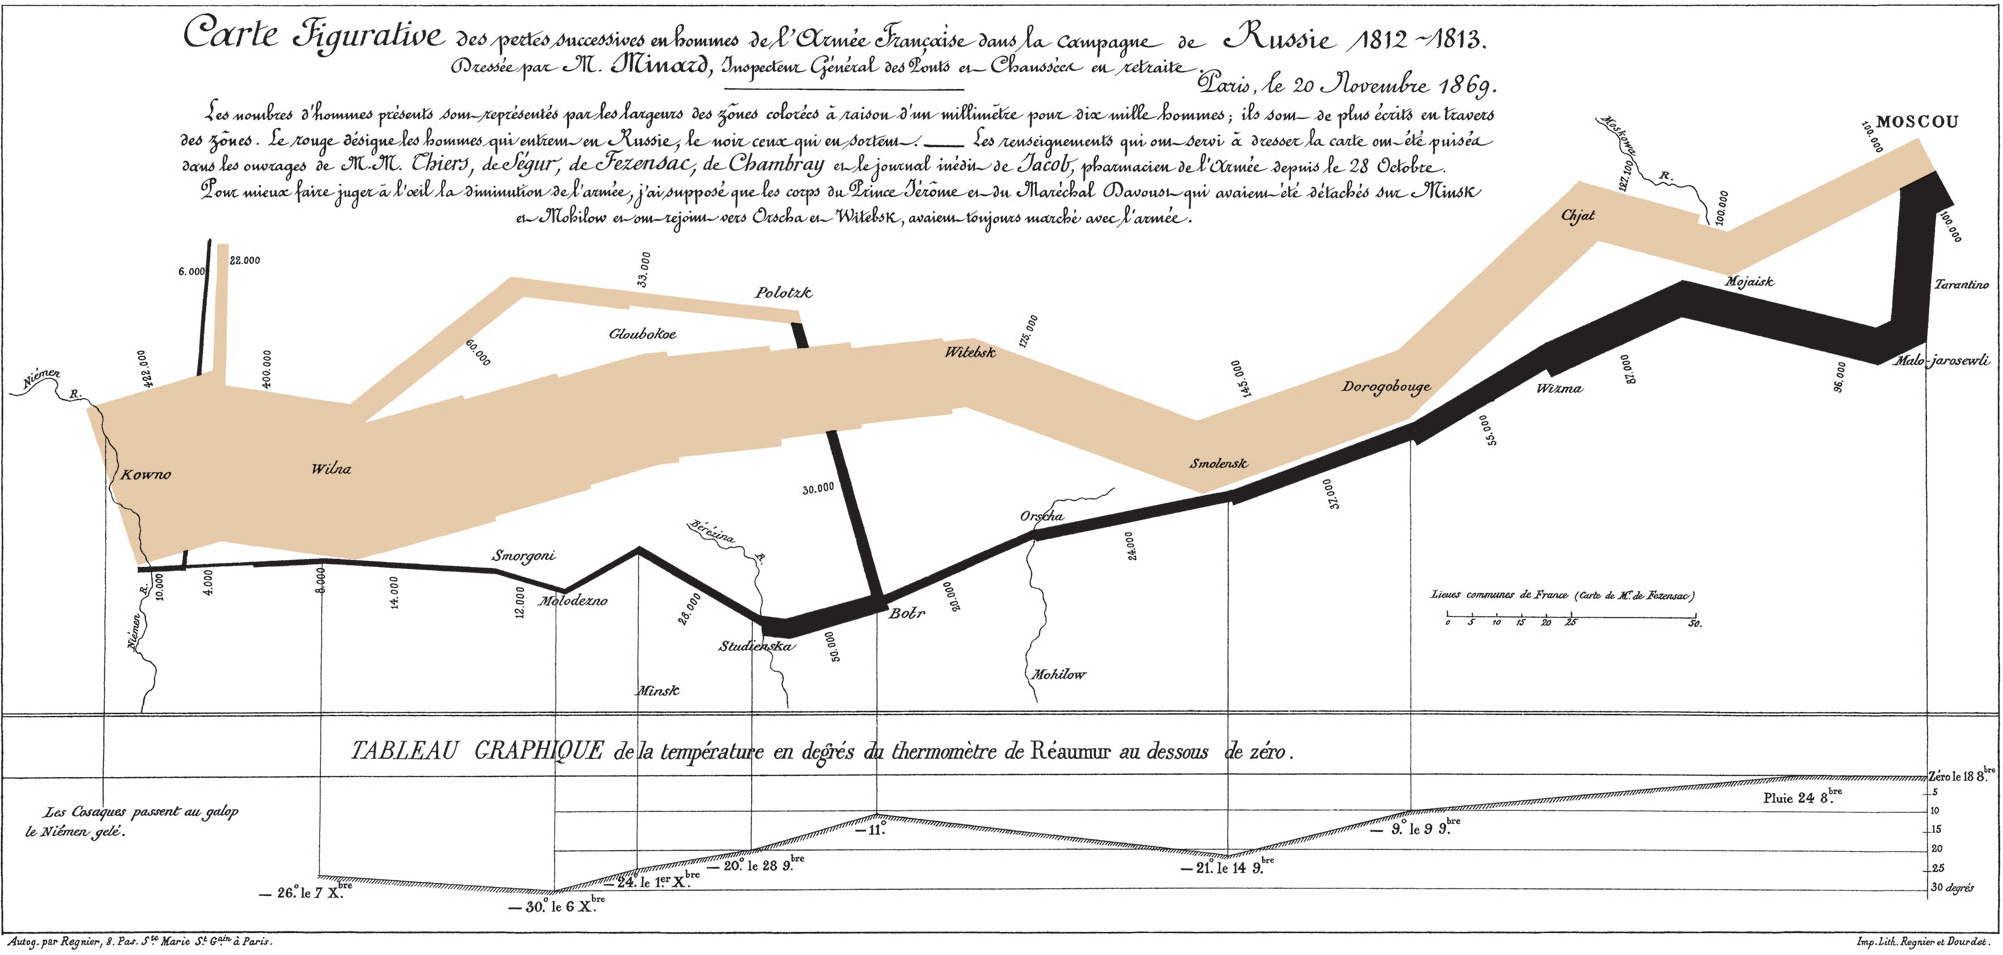 Chart of Napoleon's army size and loses during his invasion and retreat from Russia